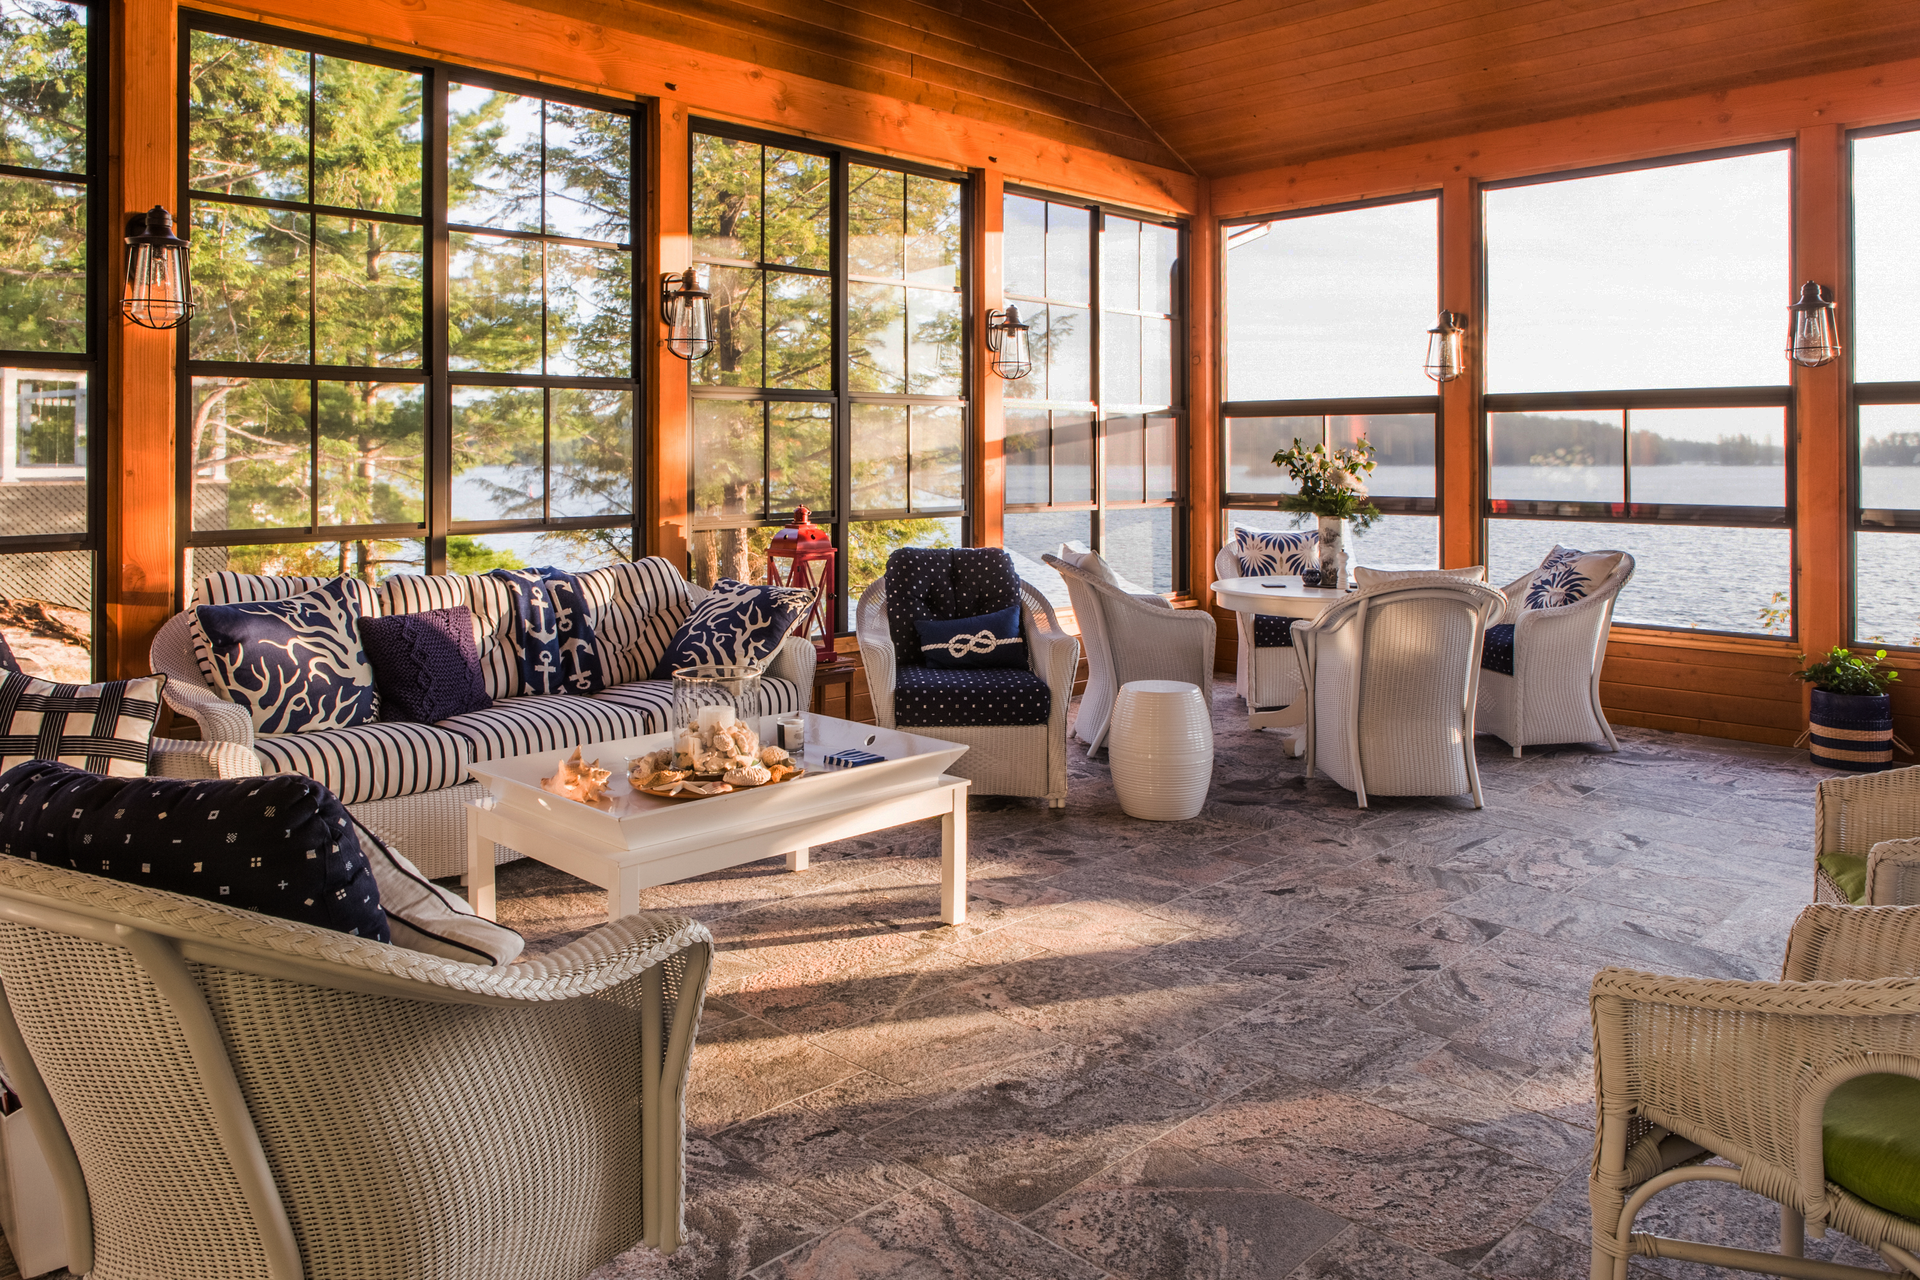 Large windows surround a sunny porch with nautical  stylings.